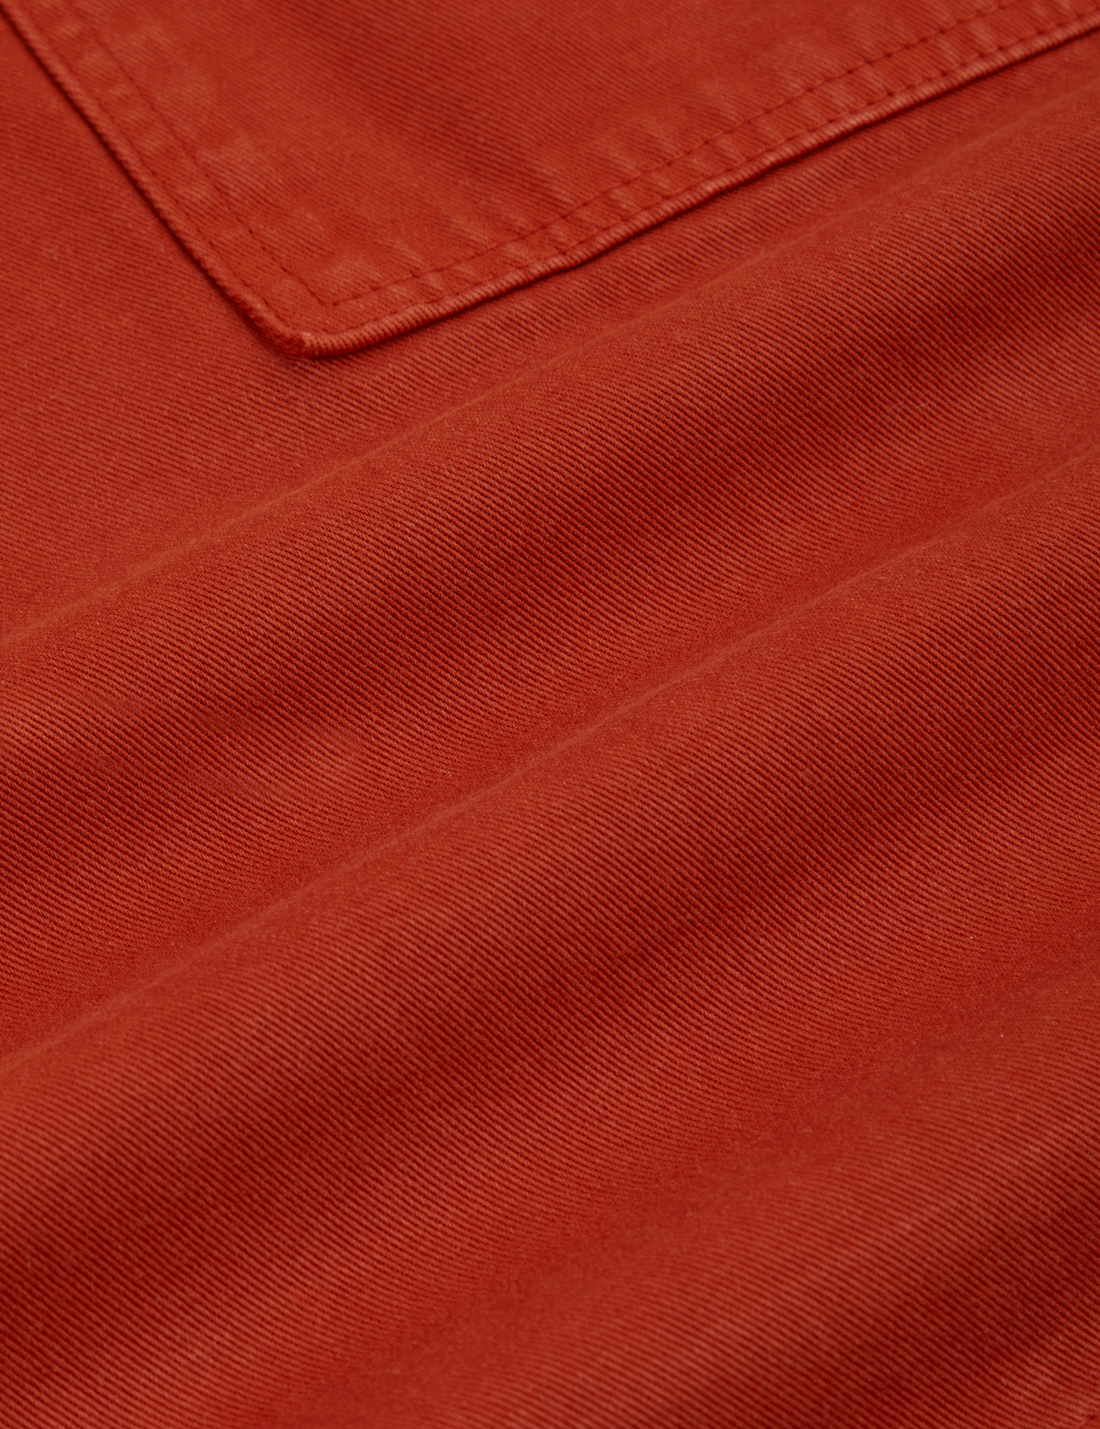 Classic Work Shorts in Paprika fabric detail close up